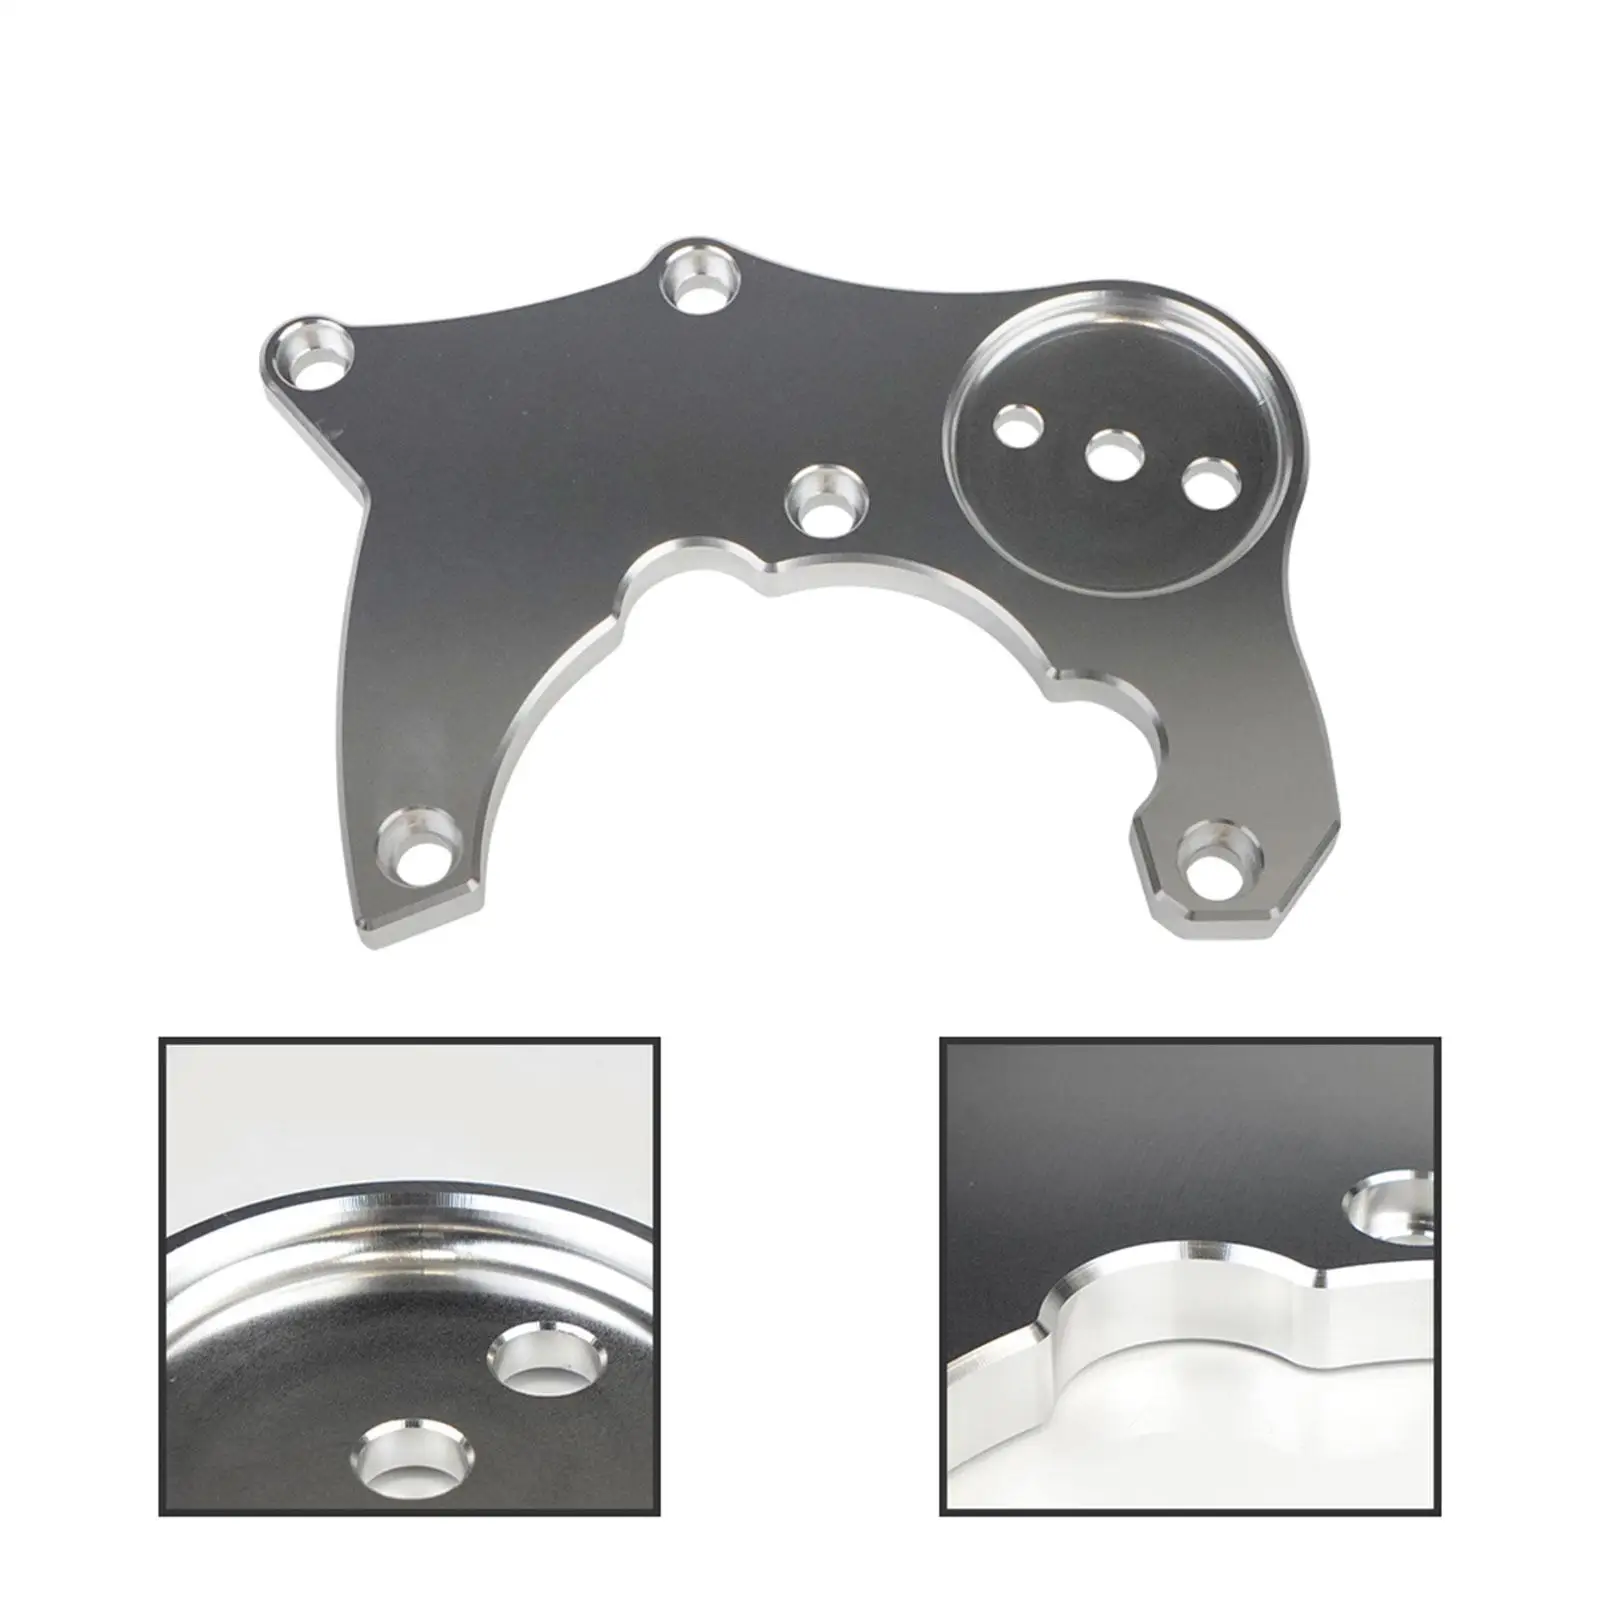 Mount Bracket Sturdy Replace Accessories Main Bracket for LS R4